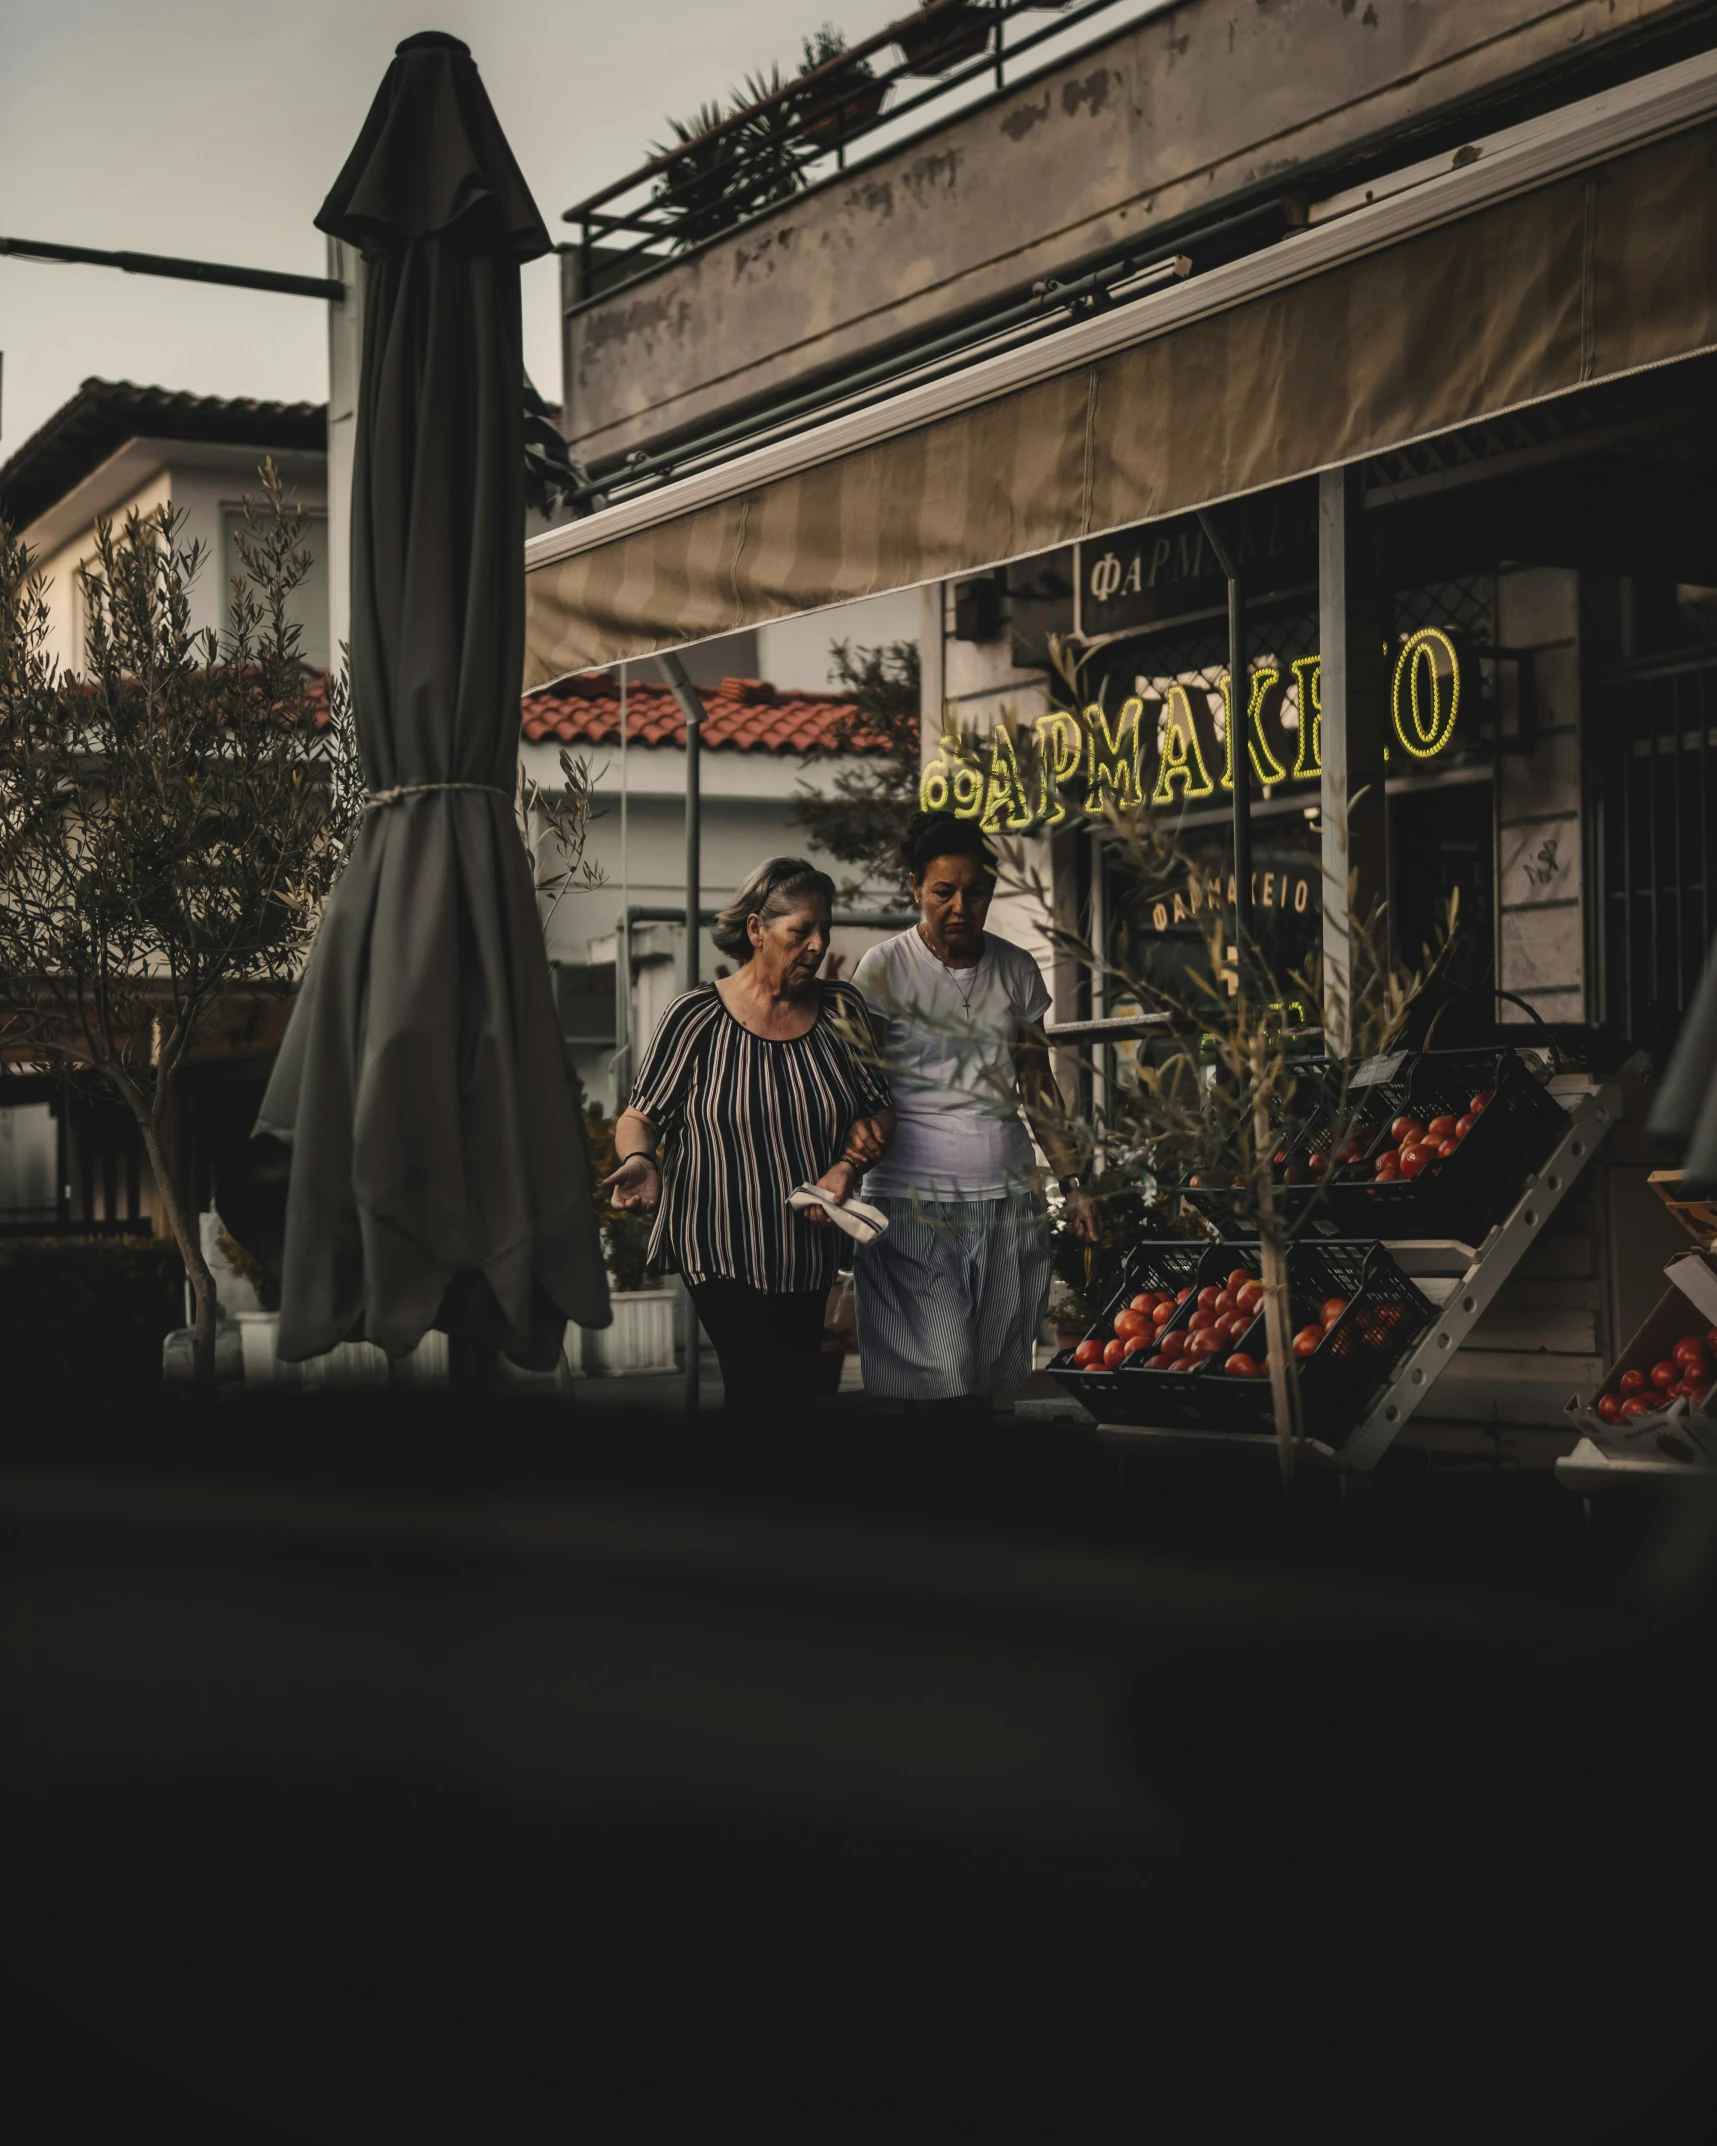 two people are outside near a fruit market